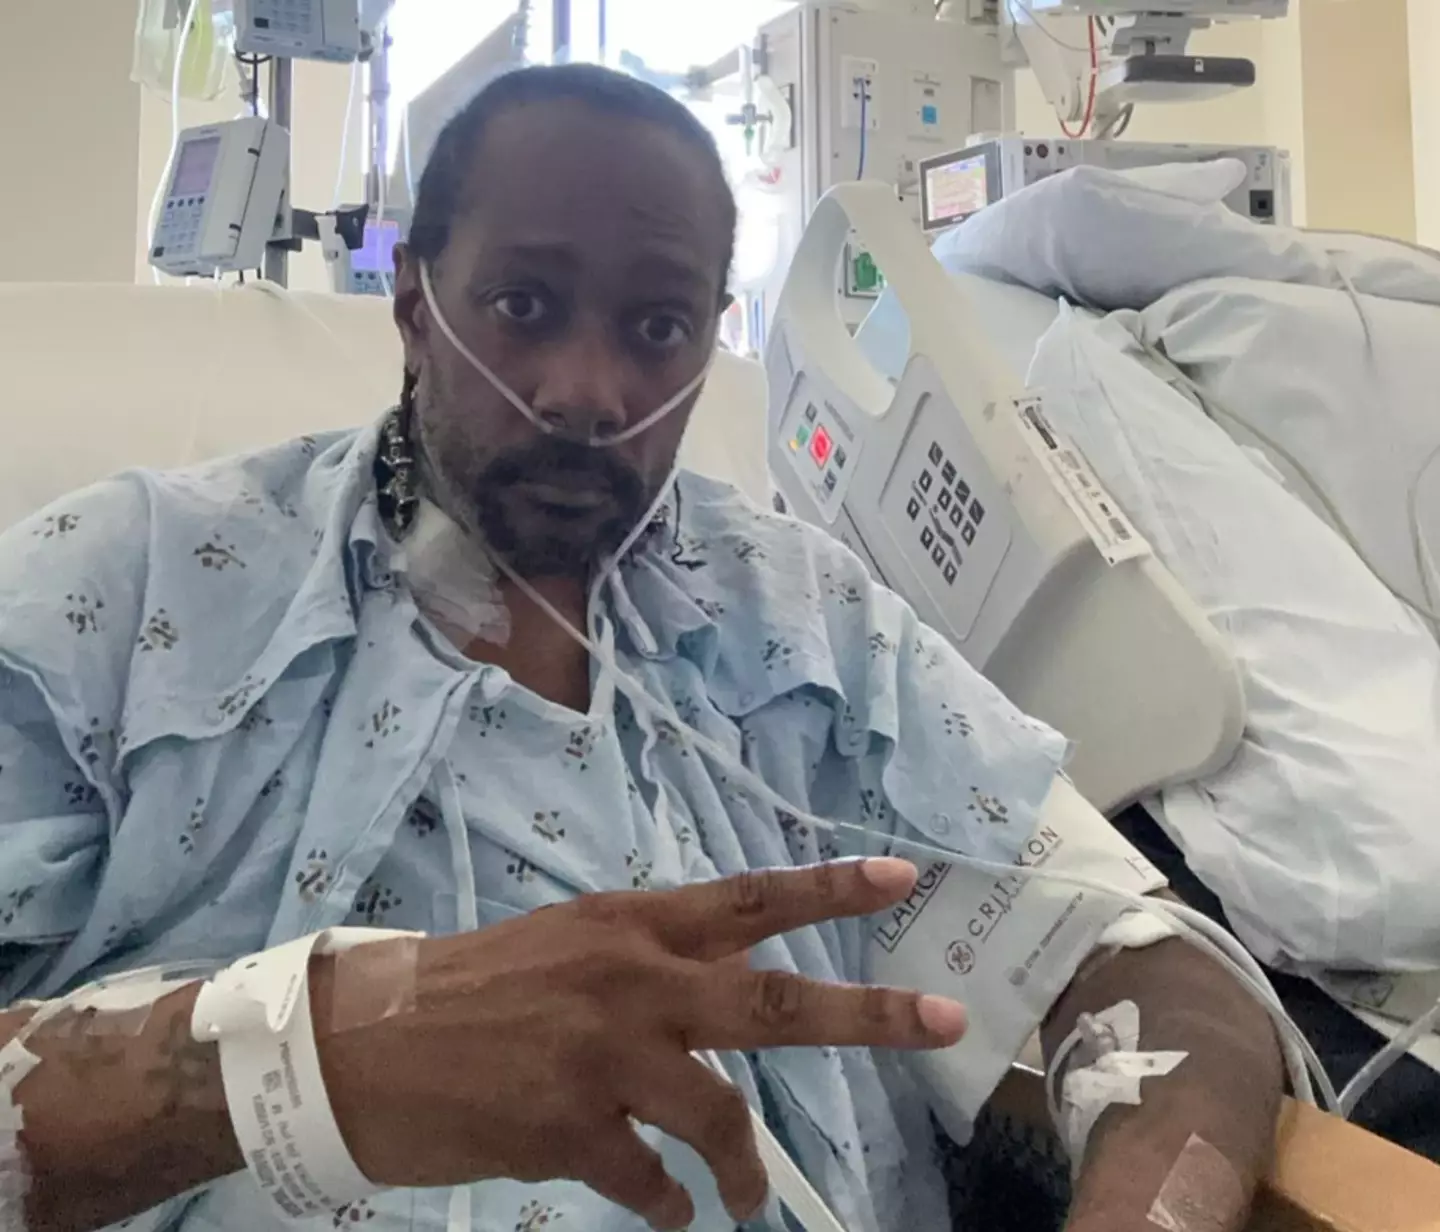 Krayzie Bone shared a photo of himself hooked up to wires in hospital.